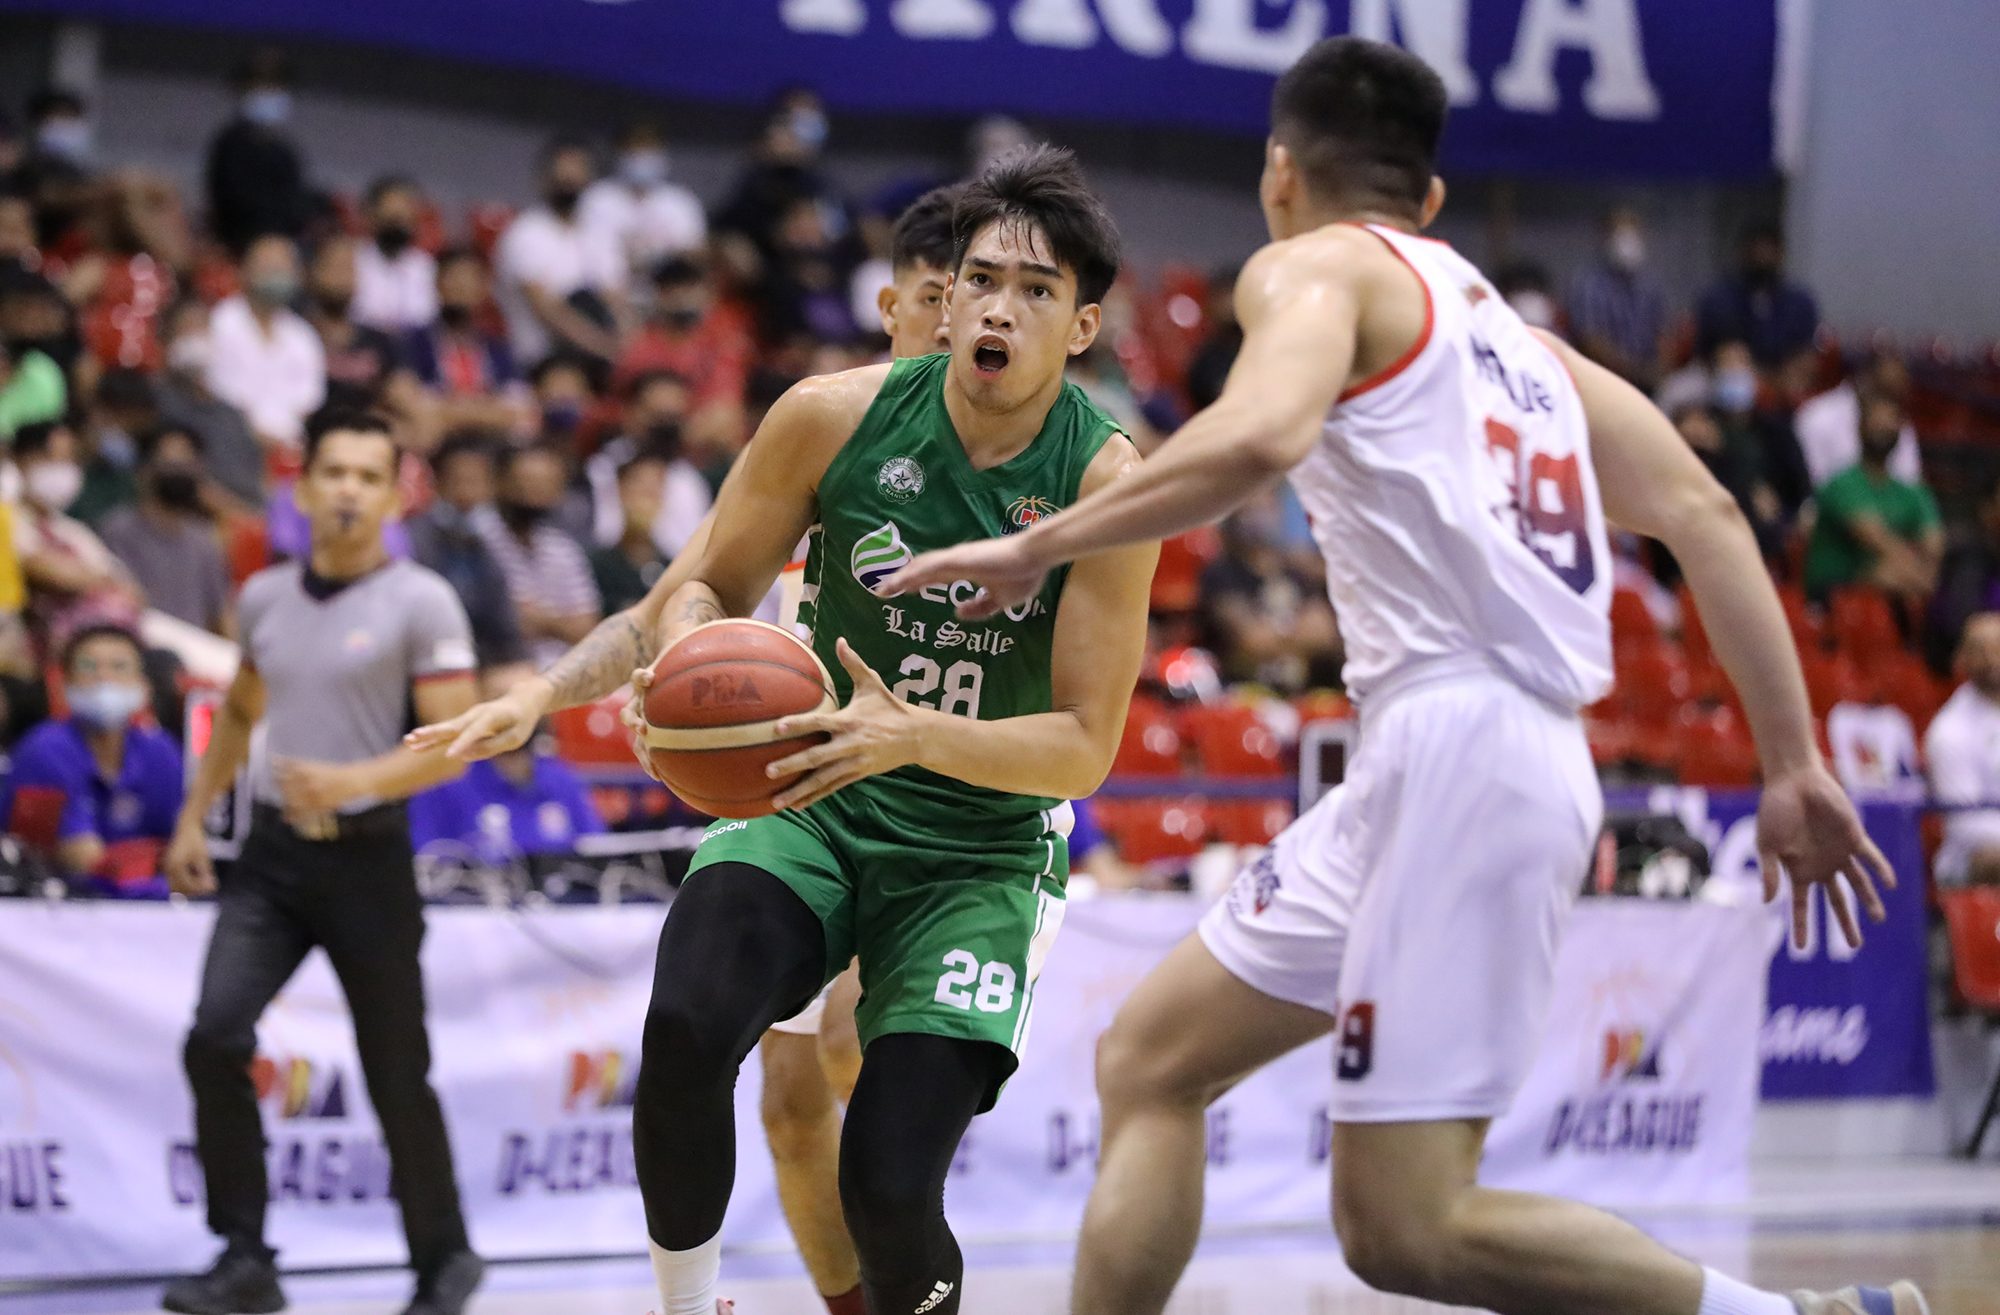 Stacked La Salle lords over 7-team PBA D-League field ahead of title defense